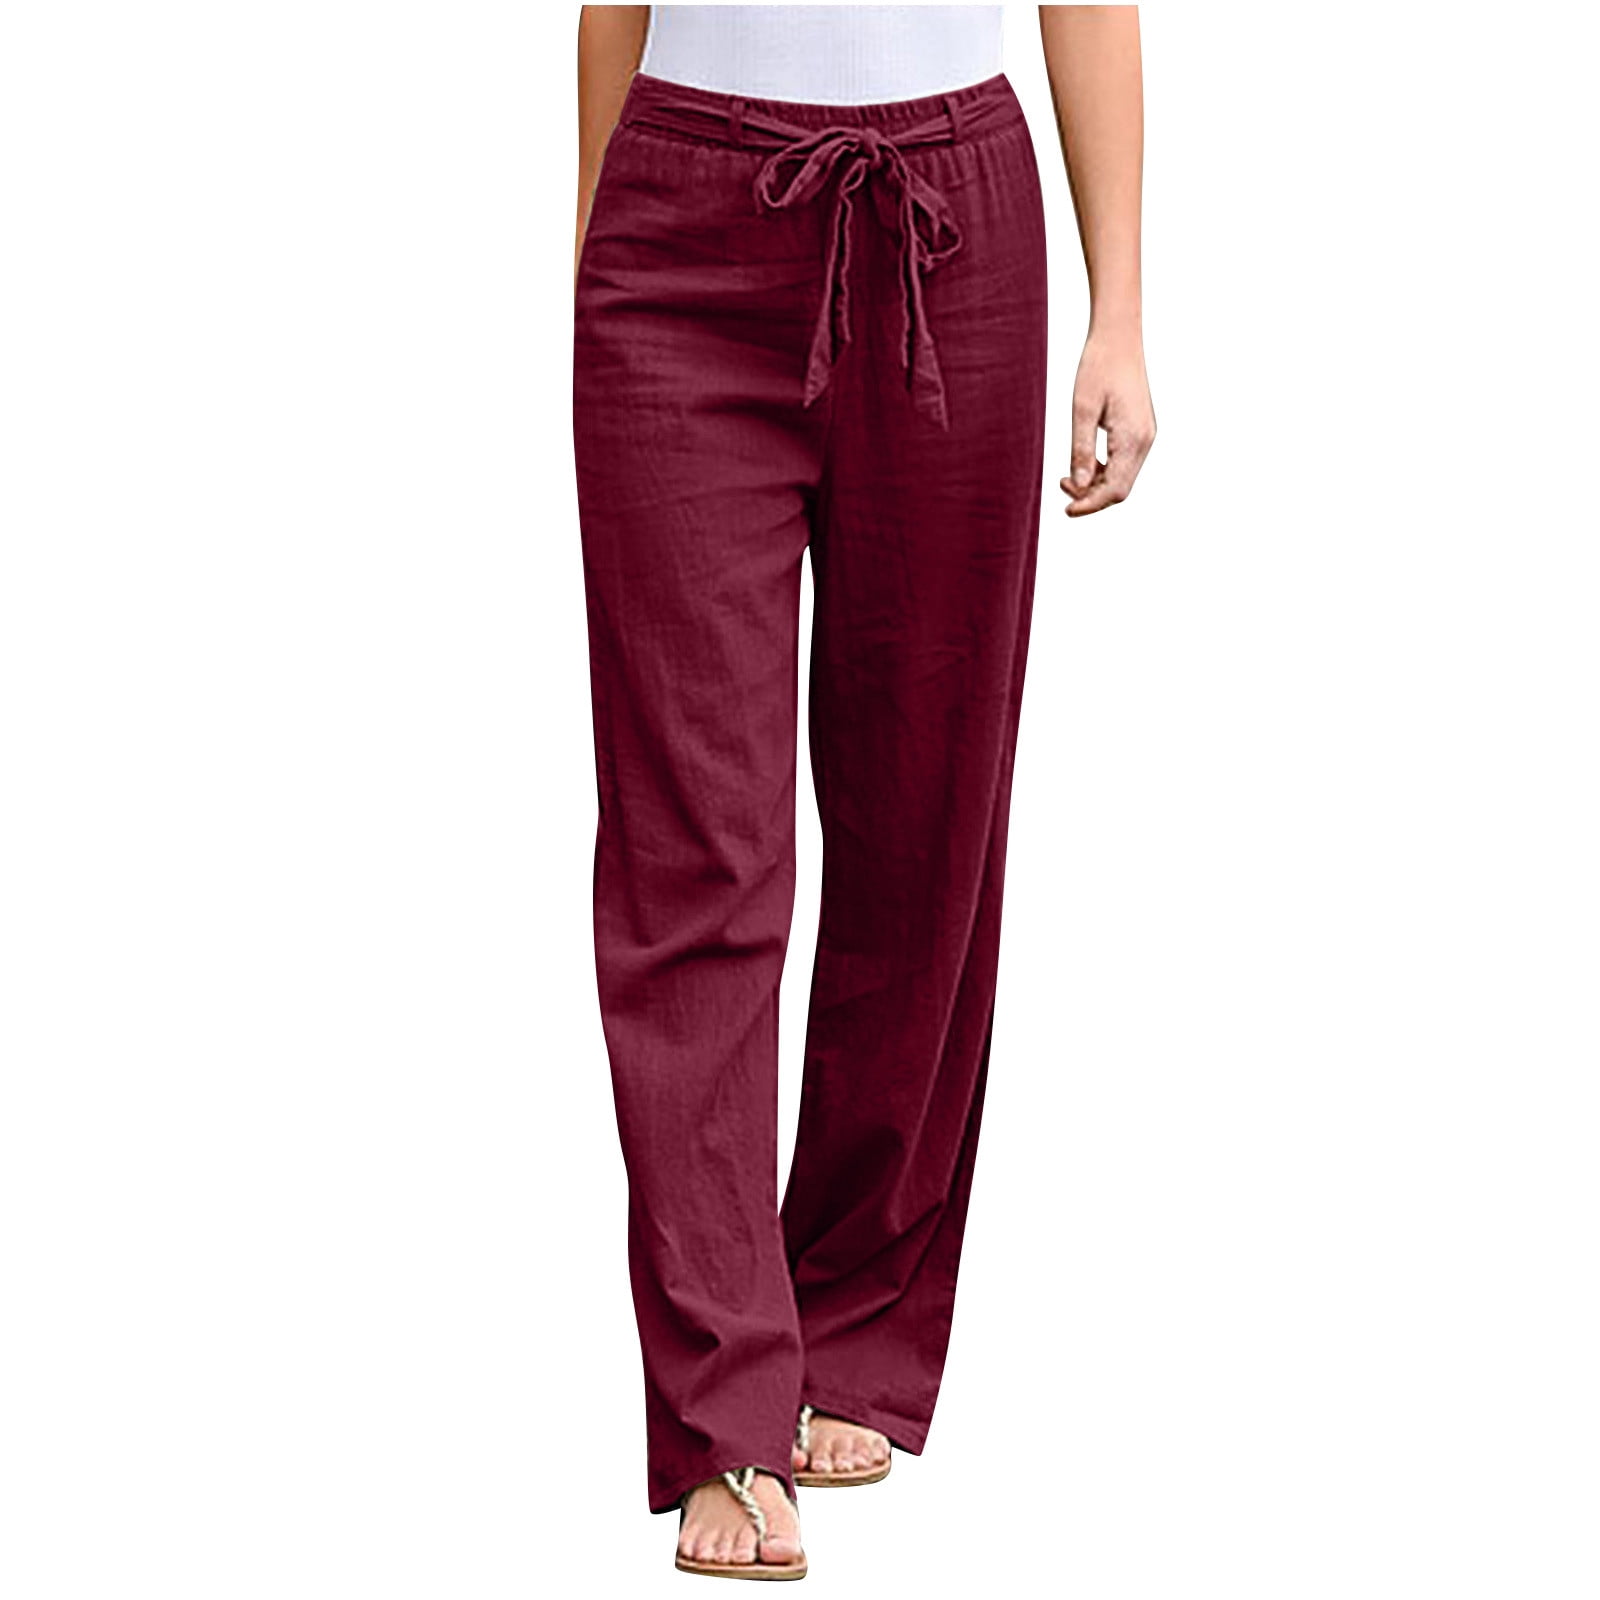 Linen Pants Women Summer Plus Size Casual Solid Color Comfy High Rise Pants  for Women Fashion Loose Fit Daily Bandage Linen And Cotton Lightweight  Party Vacation Beach Pants with Pocket（Wine,XL） 